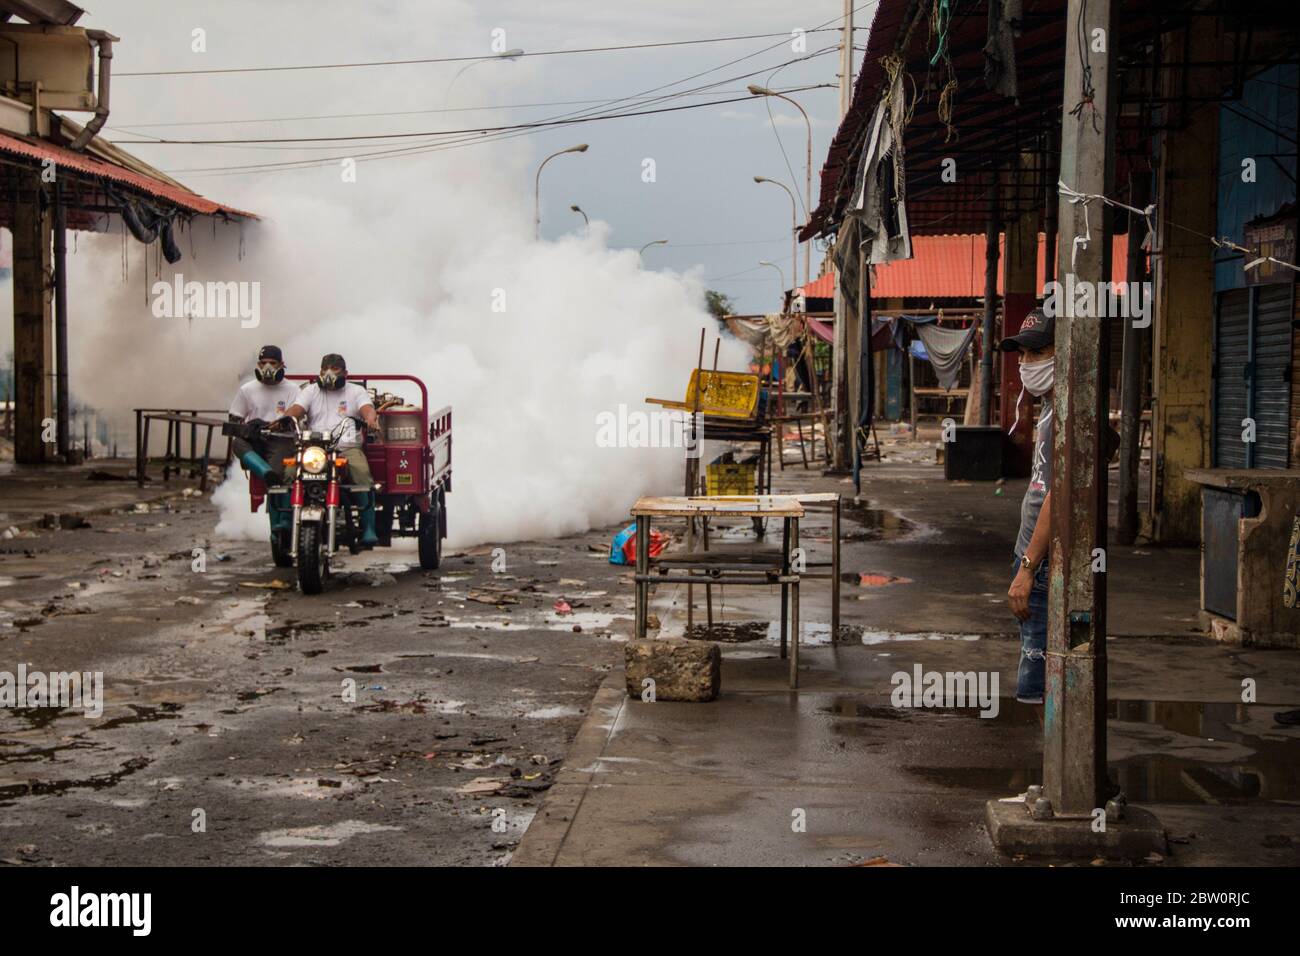 Maracaibo, Venezuela. 28th May, 2020. Two men with face masks drive through the market "Las Pulgas" and spray disinfectant against the spread of the corona virus. The market, which was considered a critical source of infection, was closed on 24 May. The Venezuelan government has identified 1,245 Covid-19 infected people nationwide. According to official sources, 11 people are believed to have died from Coronavirus. Credit: Maria Fernanda Munoz/dpa/Alamy Live News Stock Photo